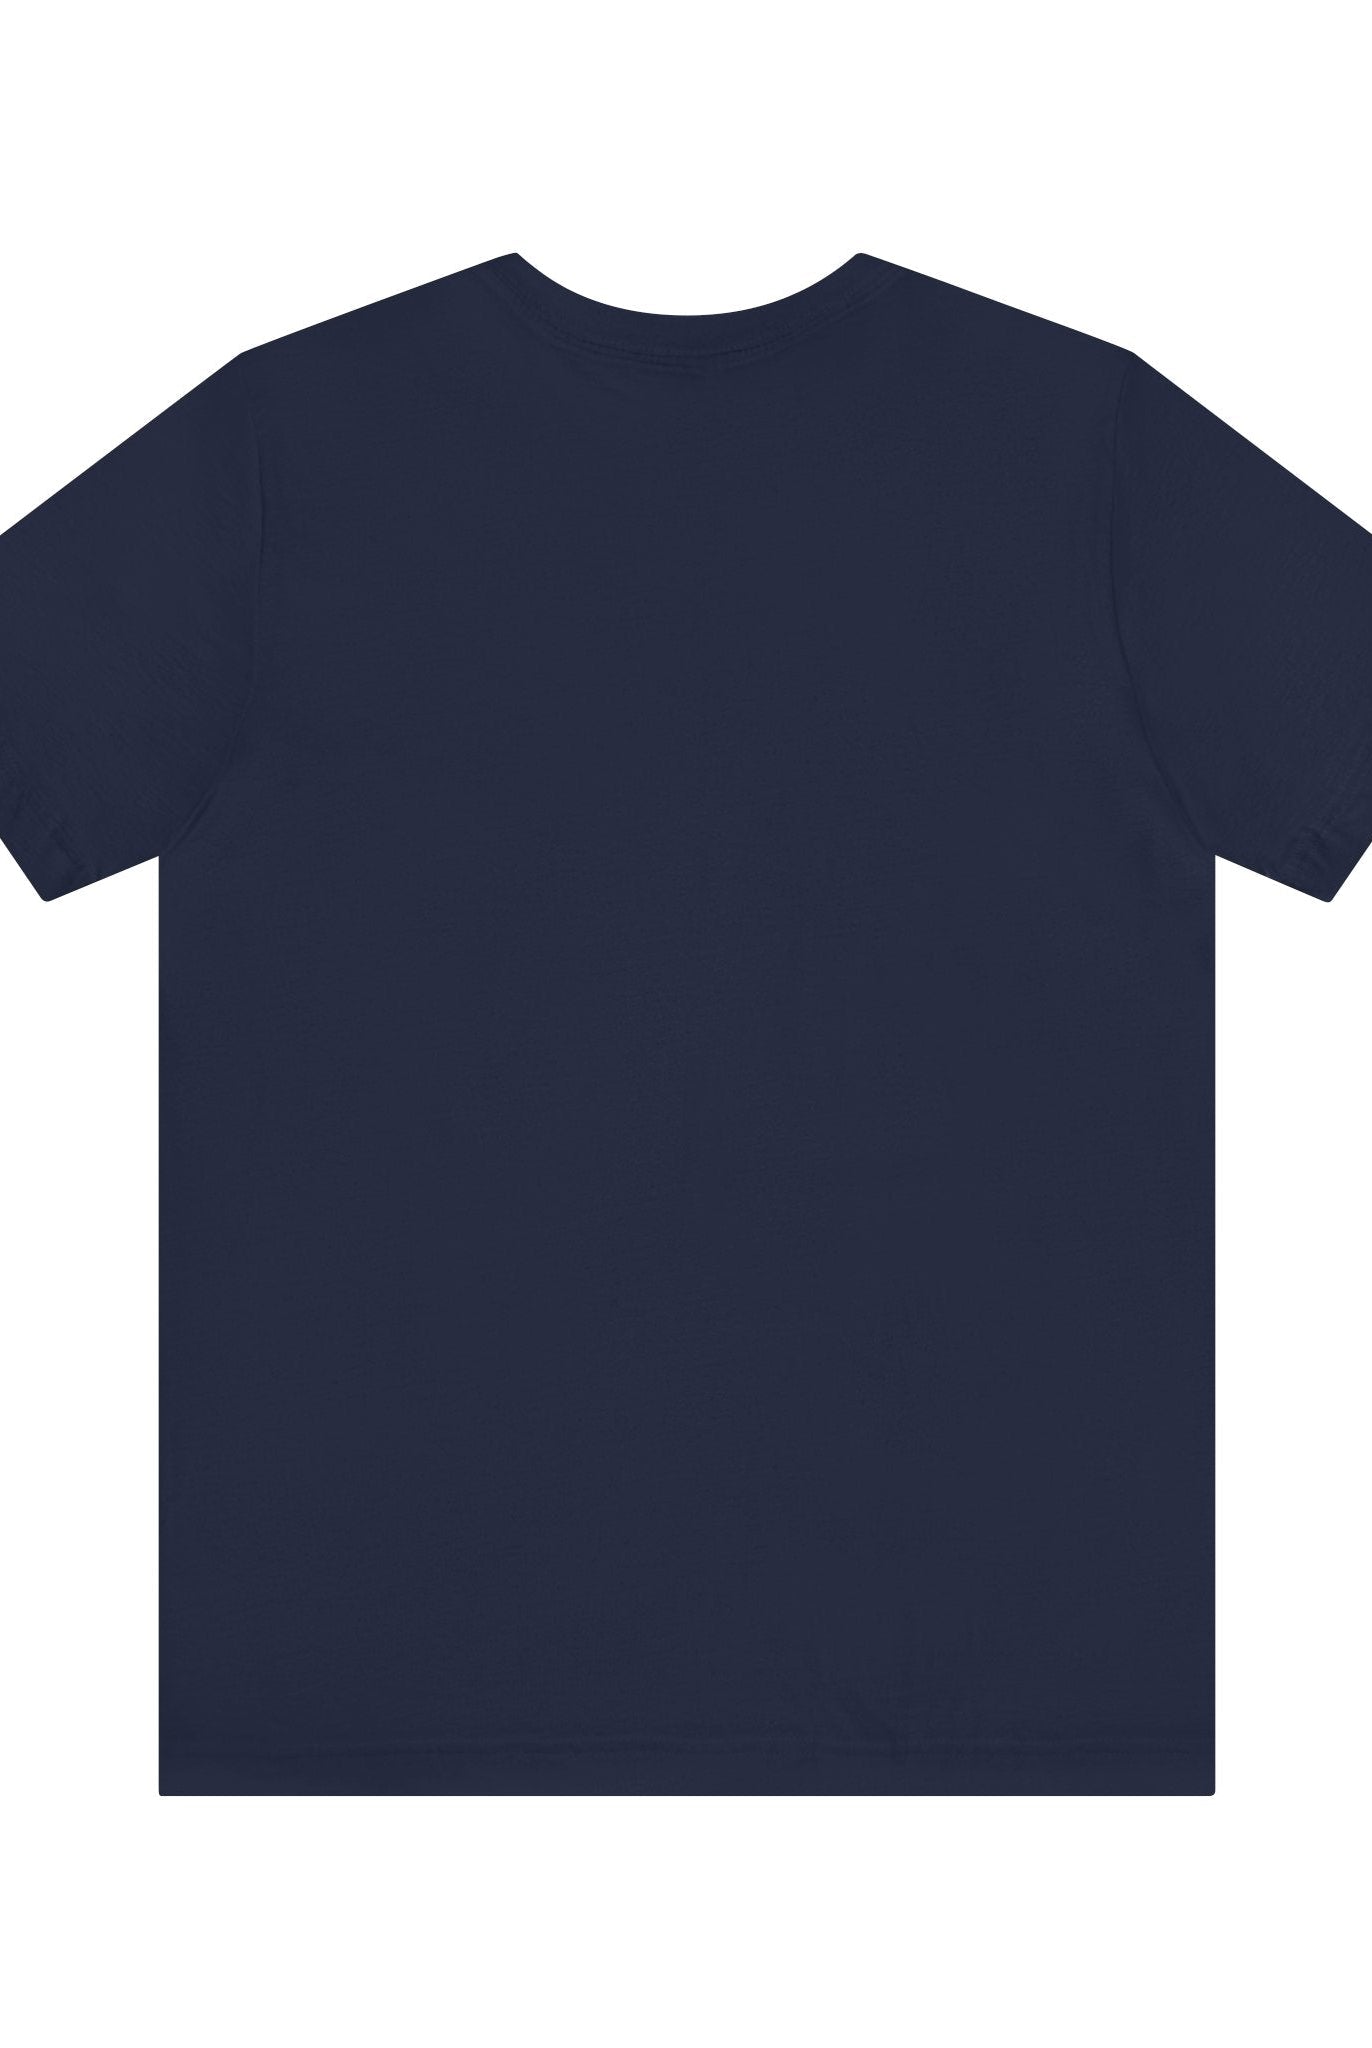 Bella & Canvas navy t shirt with white logo, direct-to-garment printed item